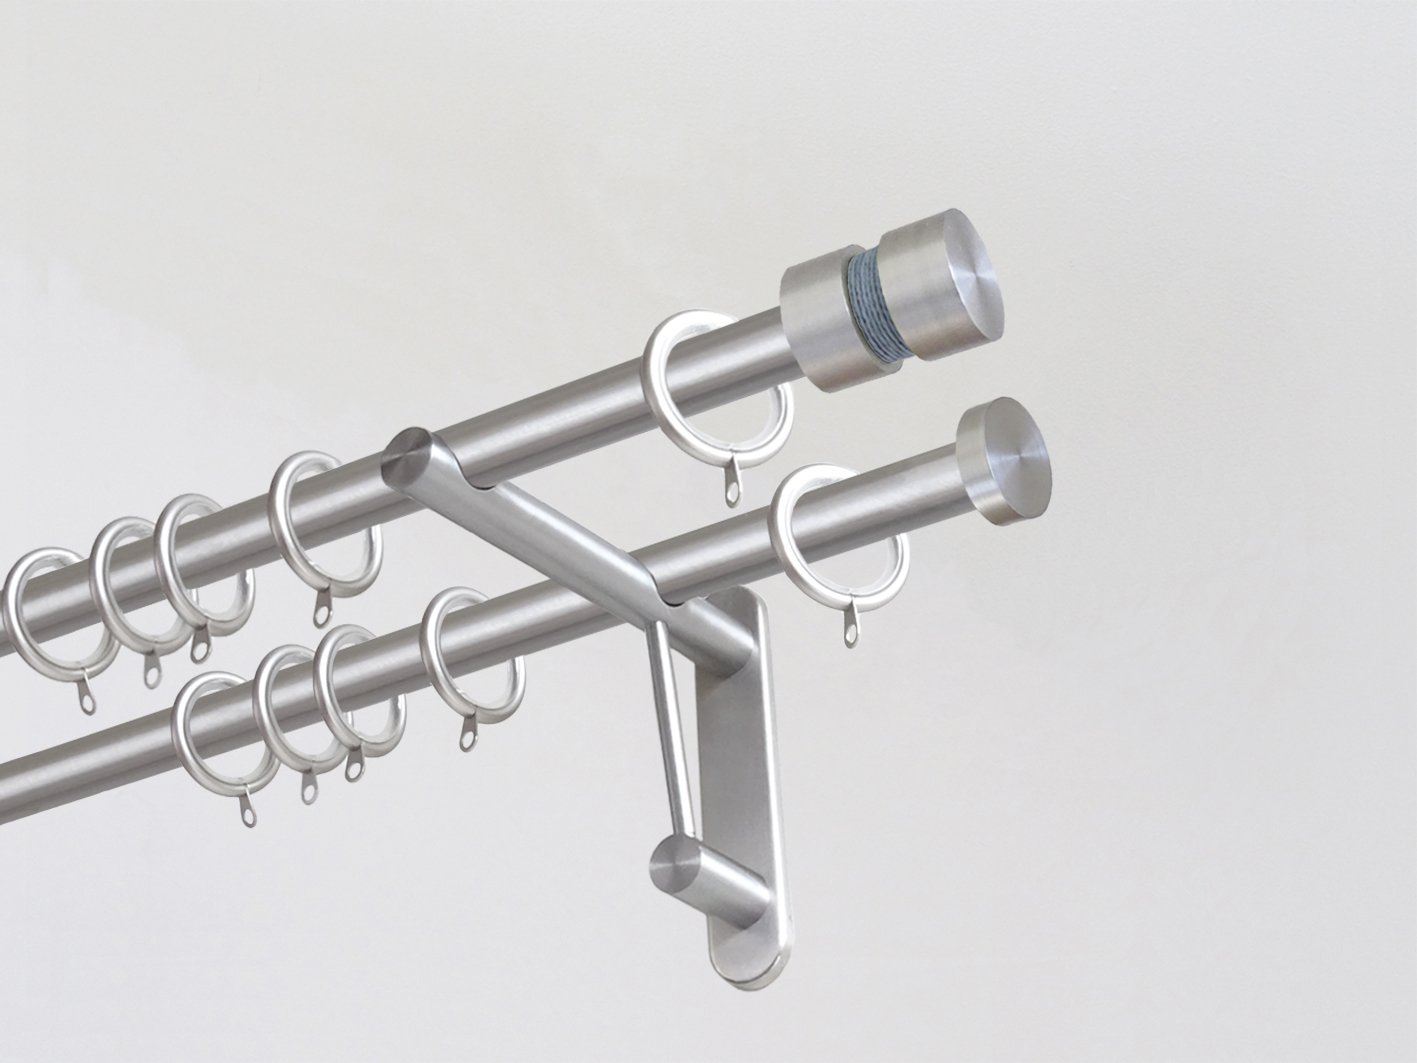 19mm diameter double stainless steel curtain pole duo system set with groove finials & mist twine